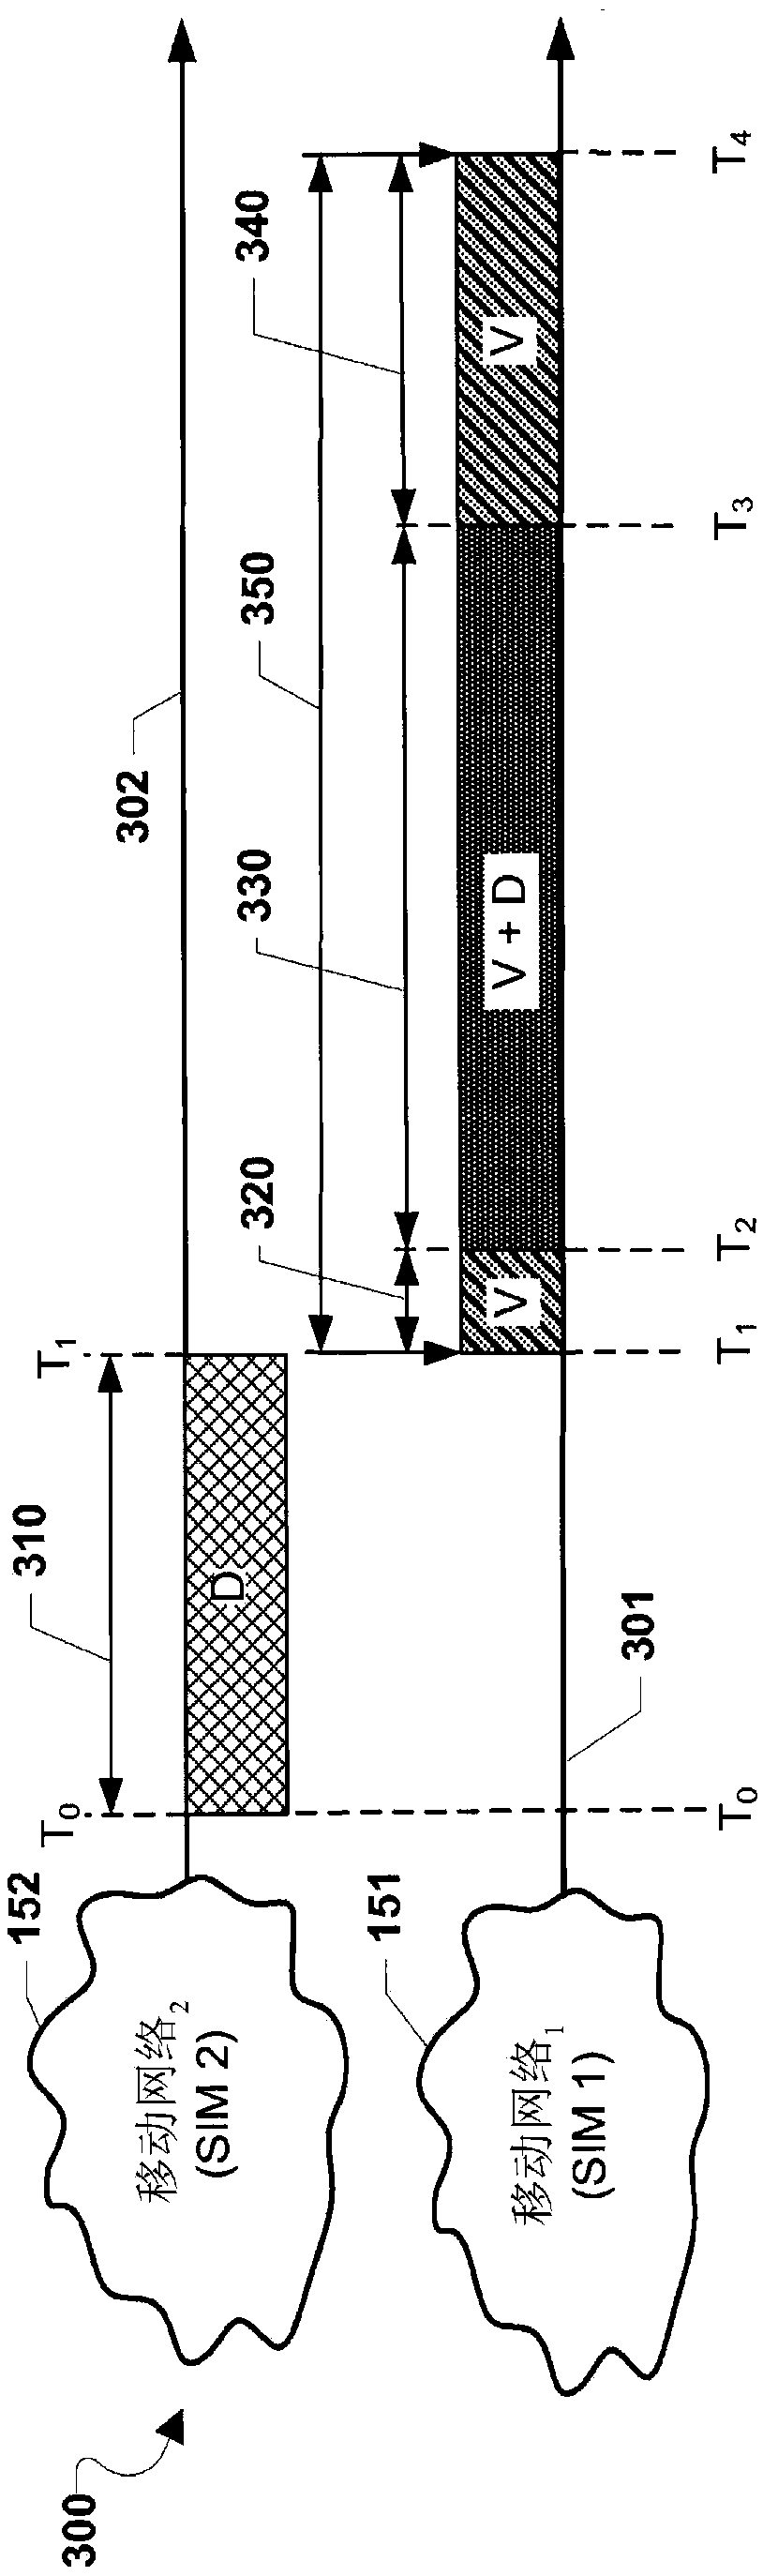 Simultaneous voice and data for dual sim dual standby (dsds) wireless devices